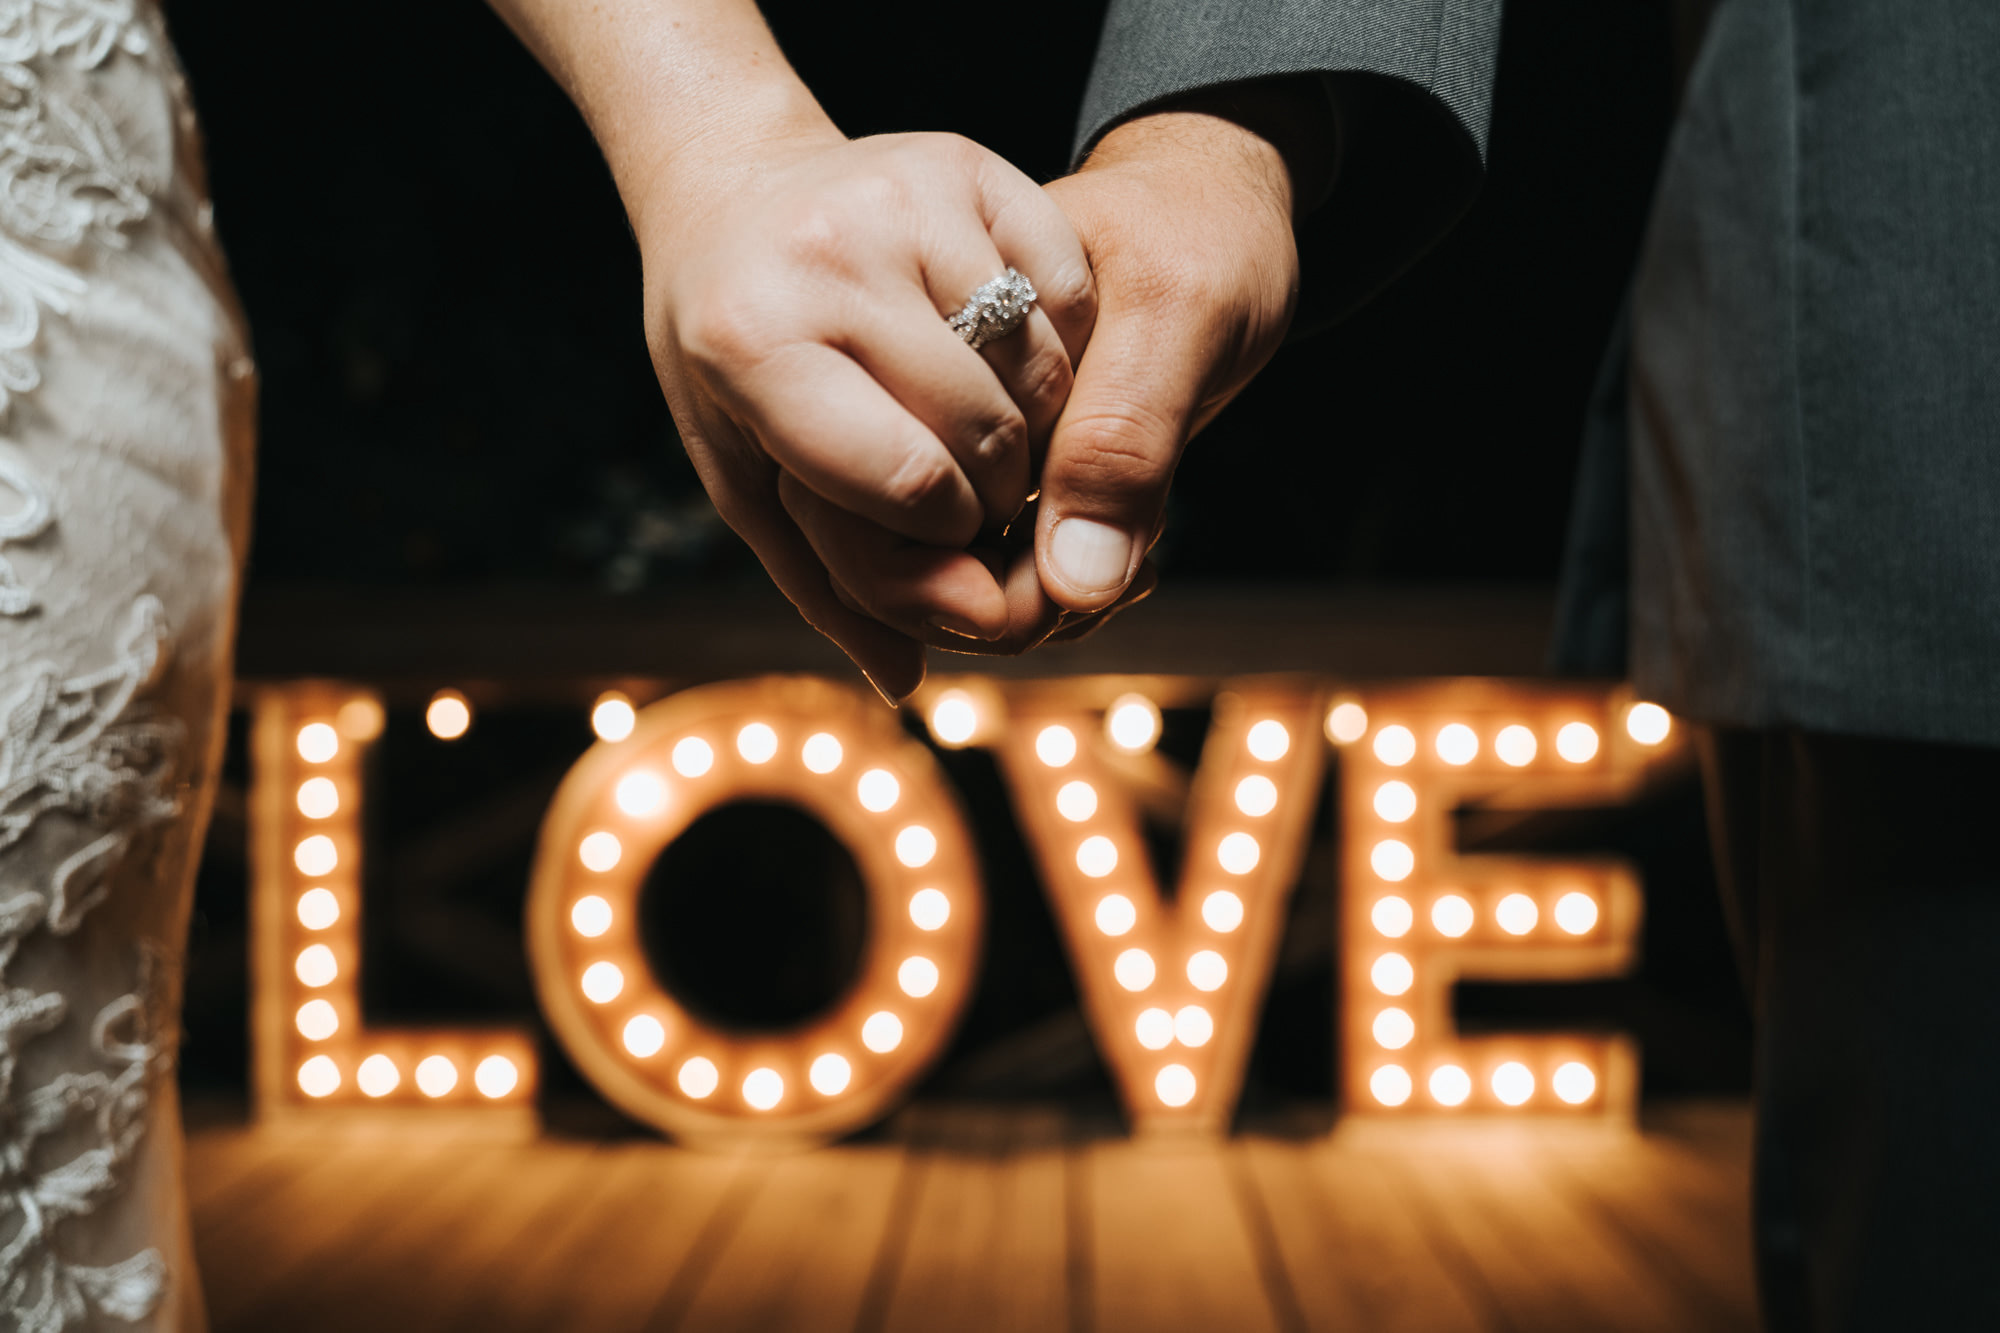 Bride and Groom Holding Hands | Wedding Ring Shot | Wedding Marquee Light Up Letters LOVE